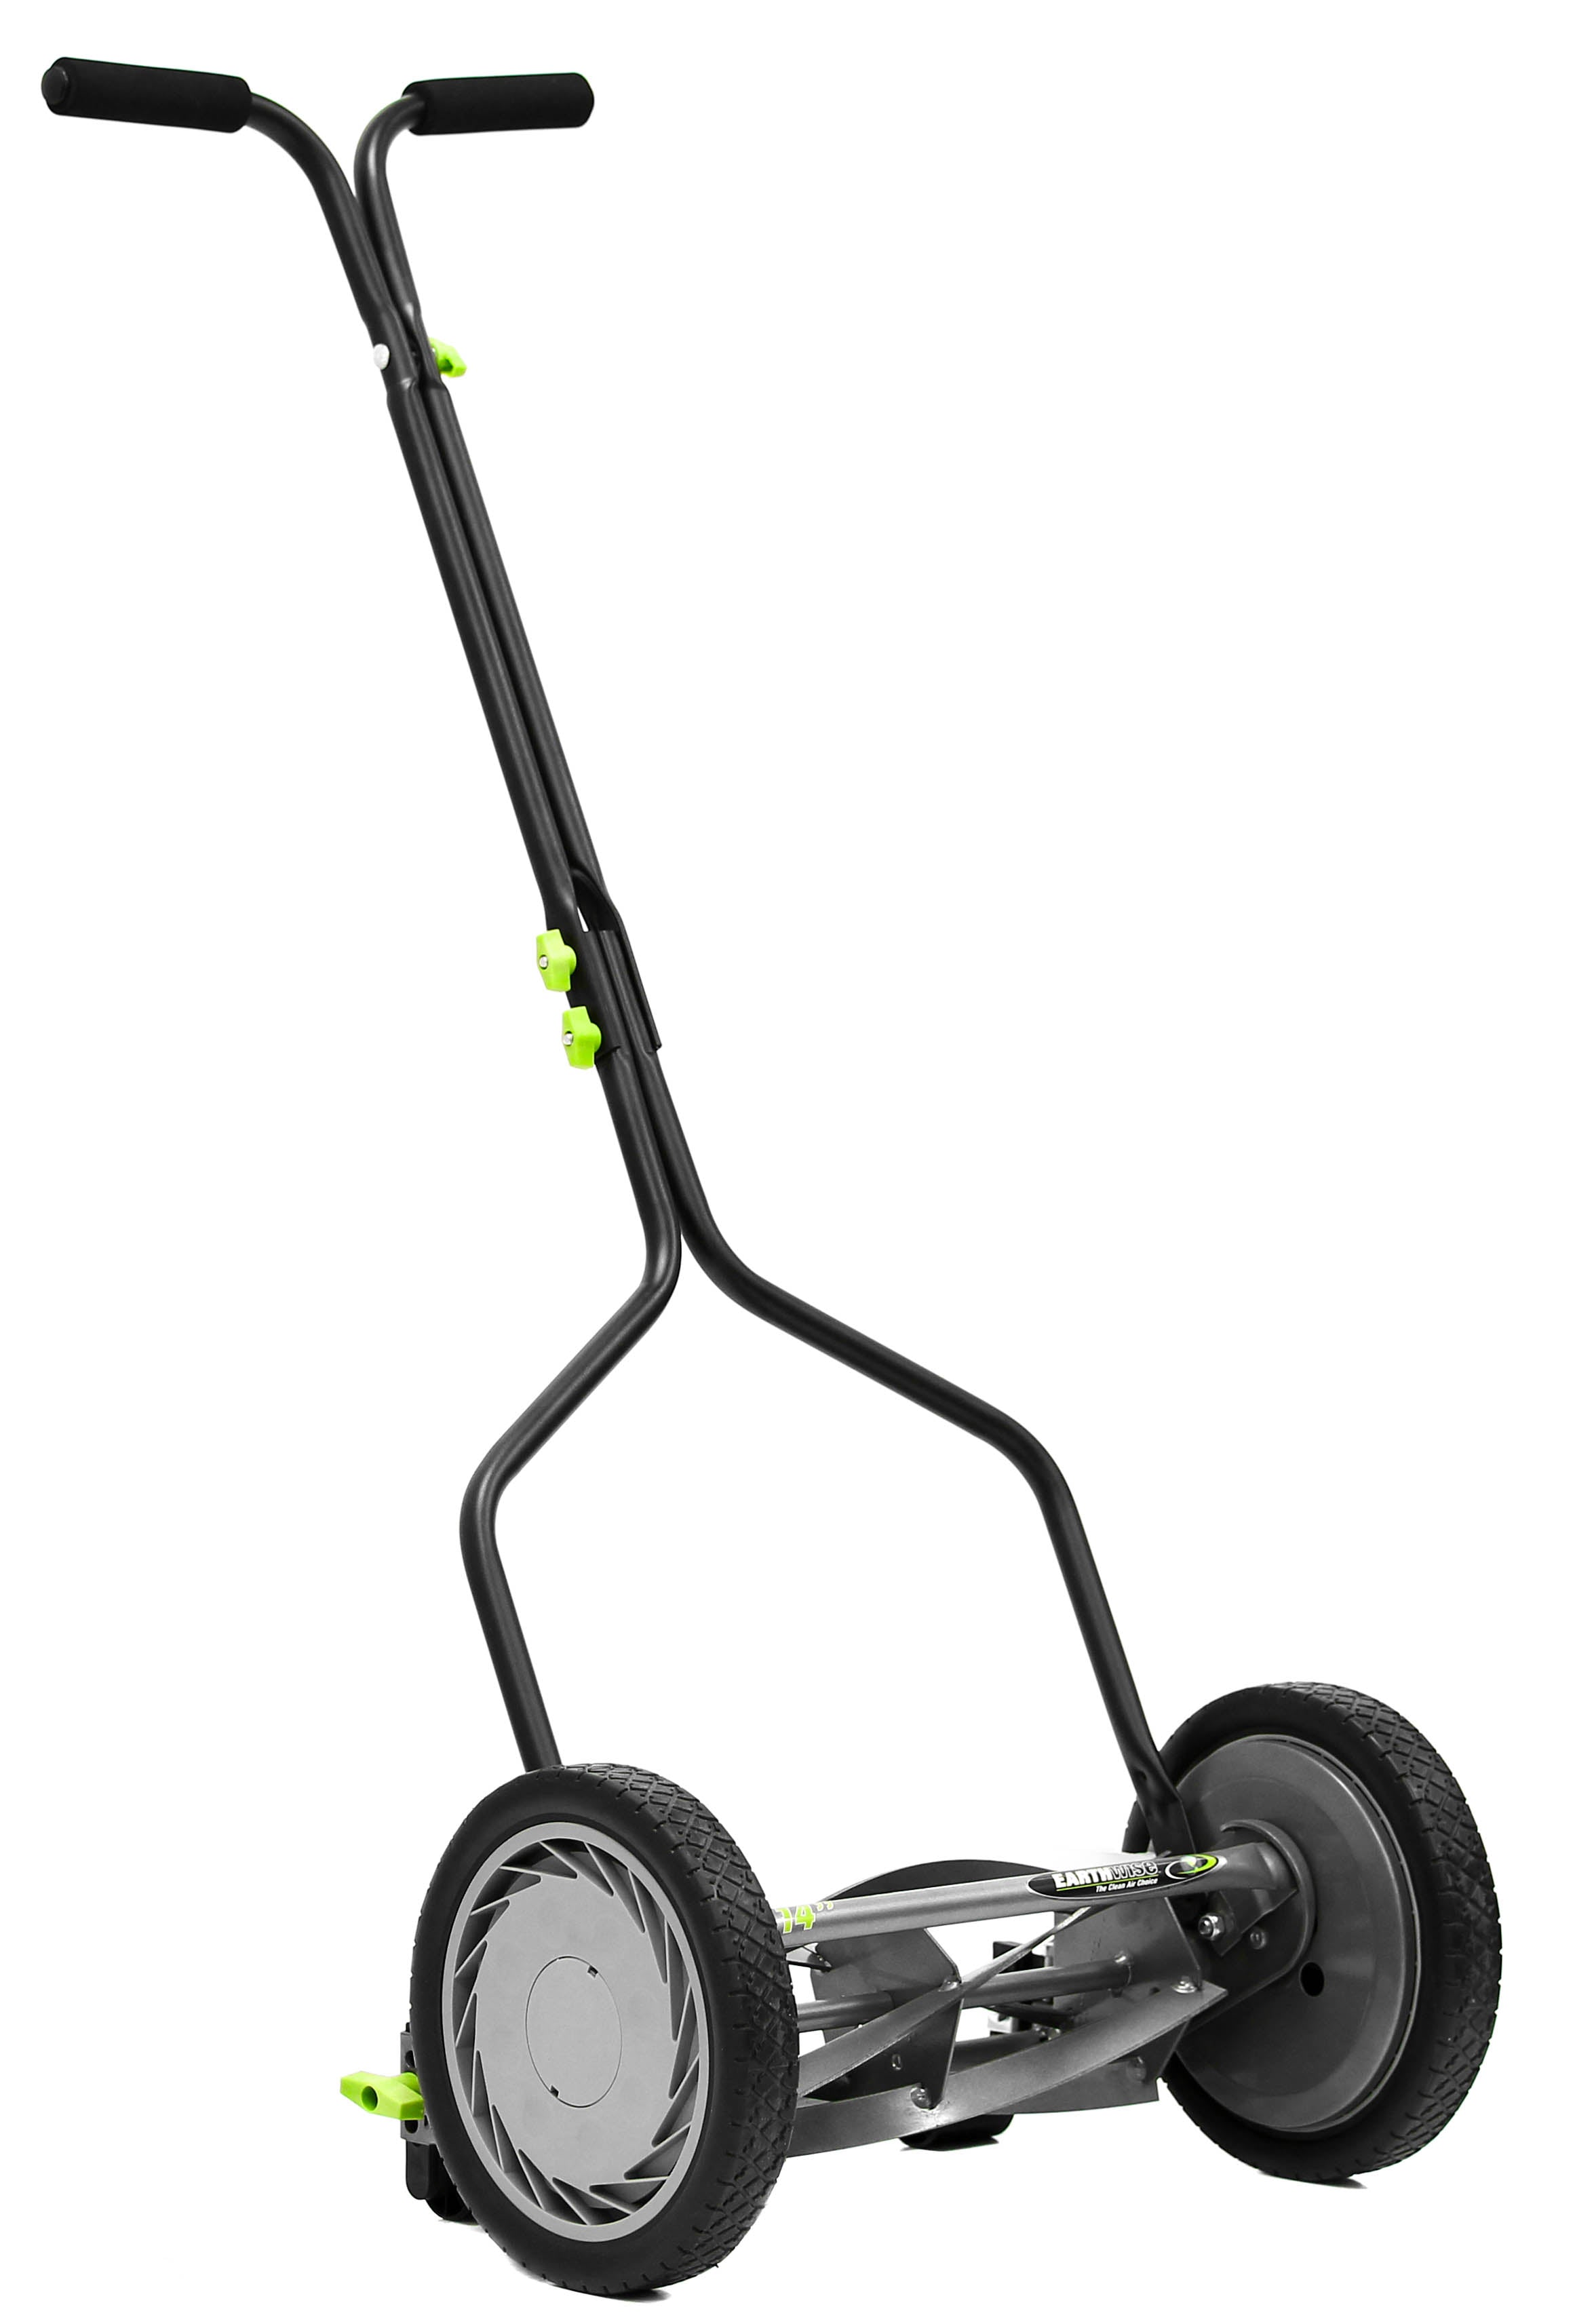 Earthwise Power Tools by ALM 14" Manual Reel Mower